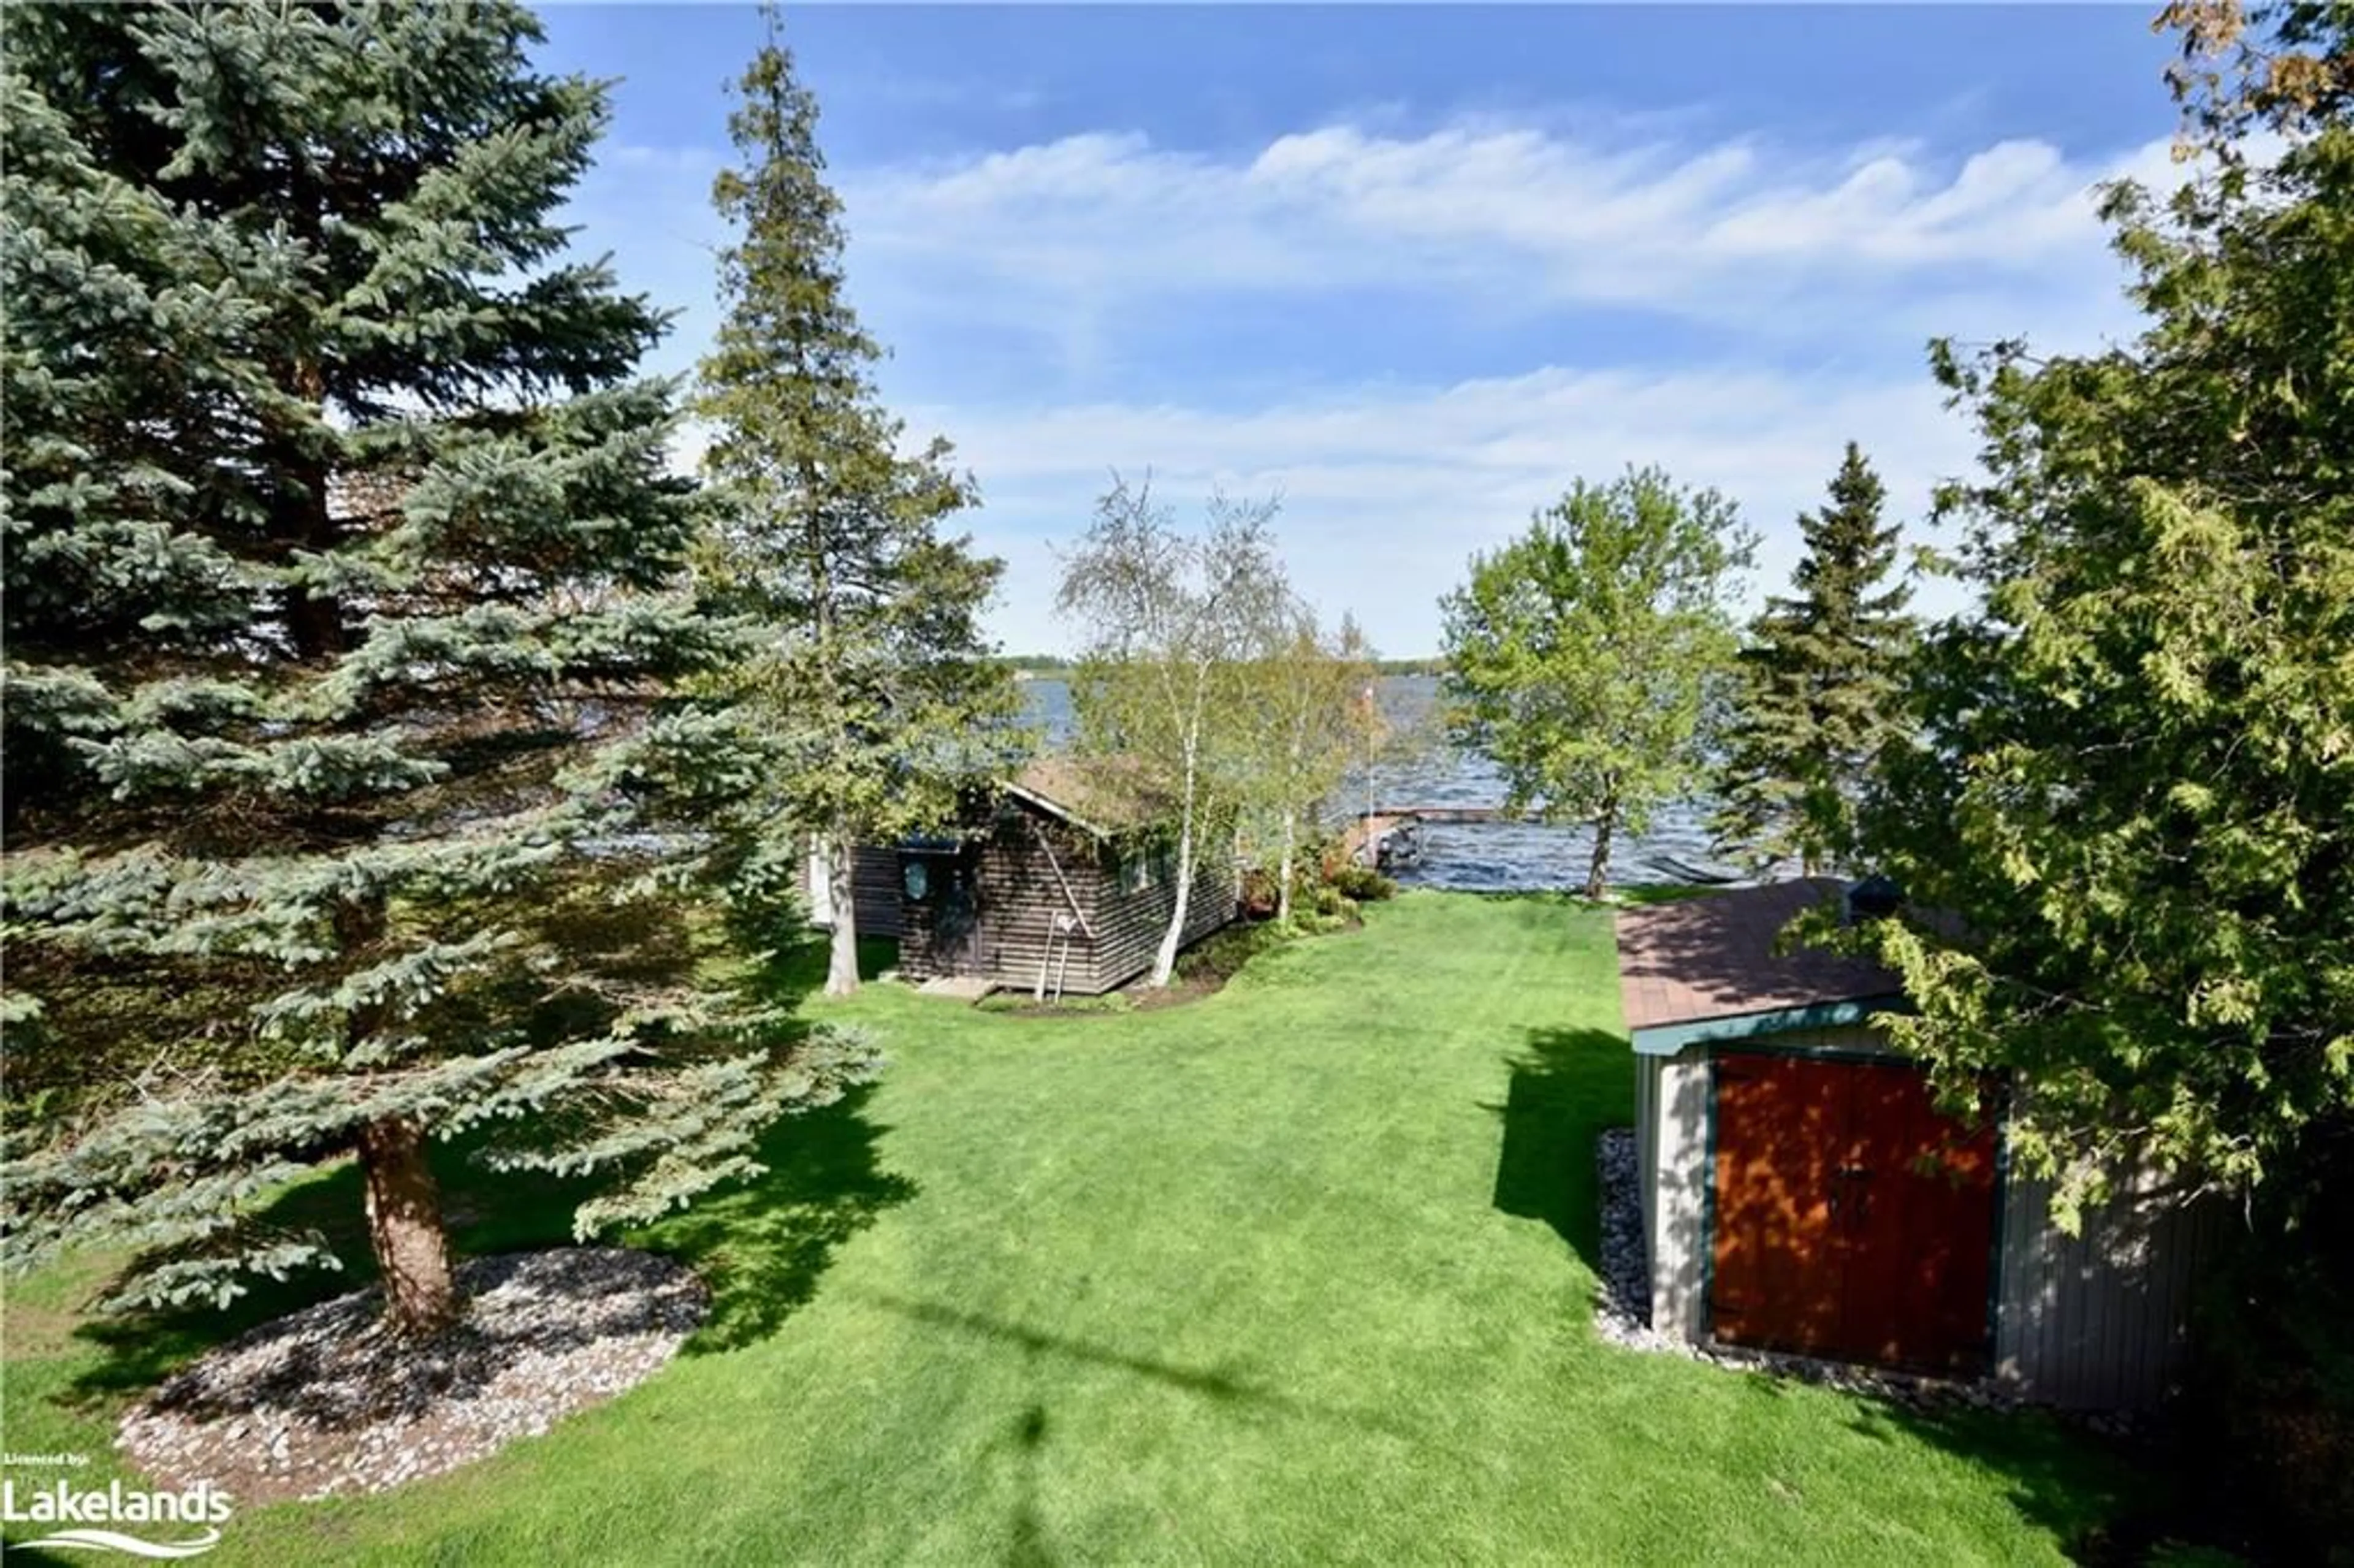 Lakeview for 85 Mcgill Dr, Janetville Ontario L0B 1K0